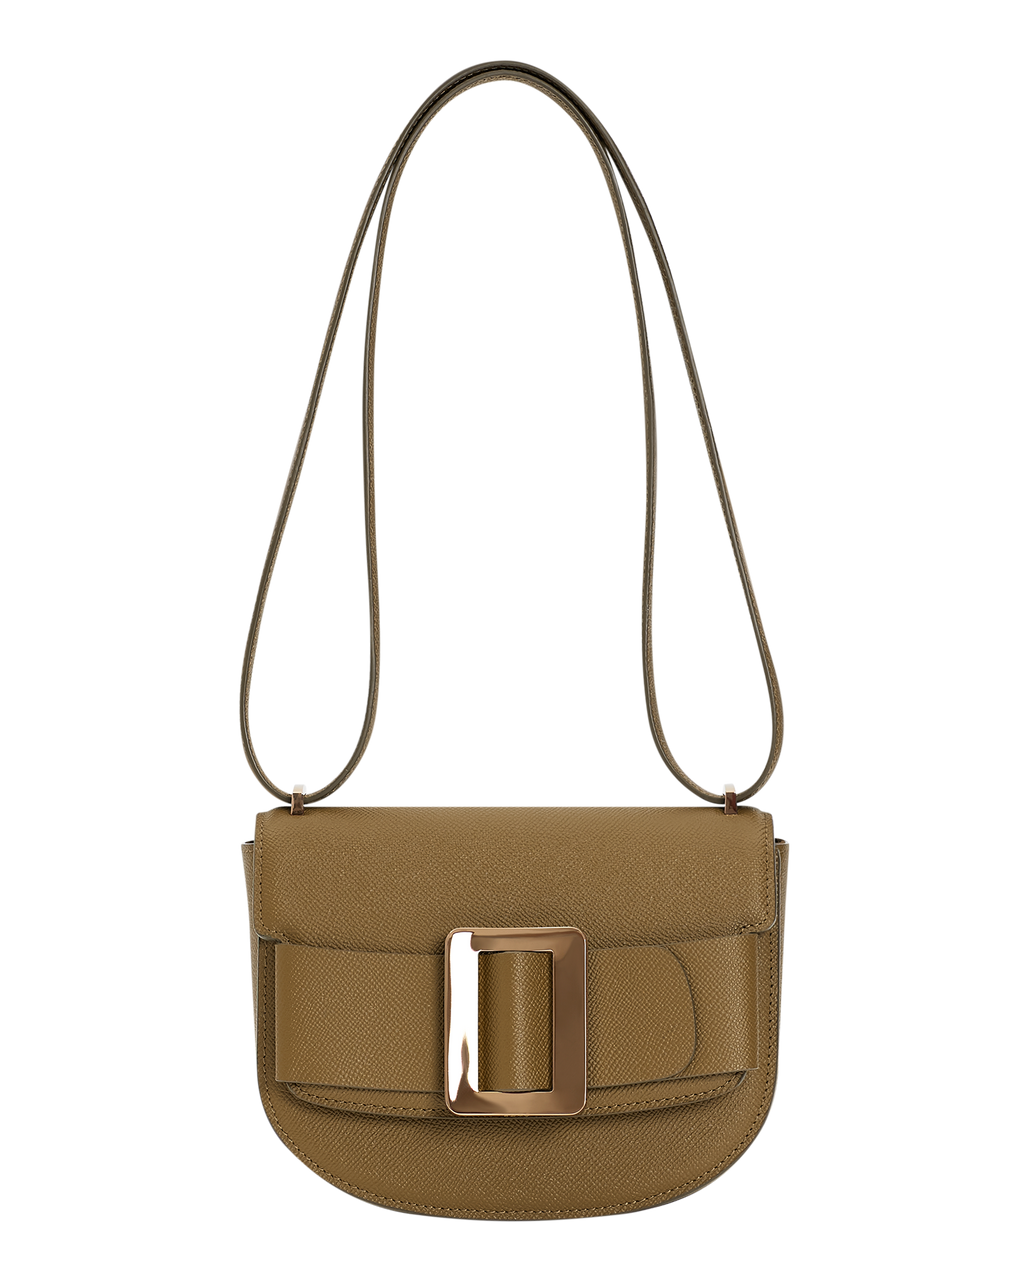 Leather Shoulder Bag With Metal Charm by Burberry in Green color